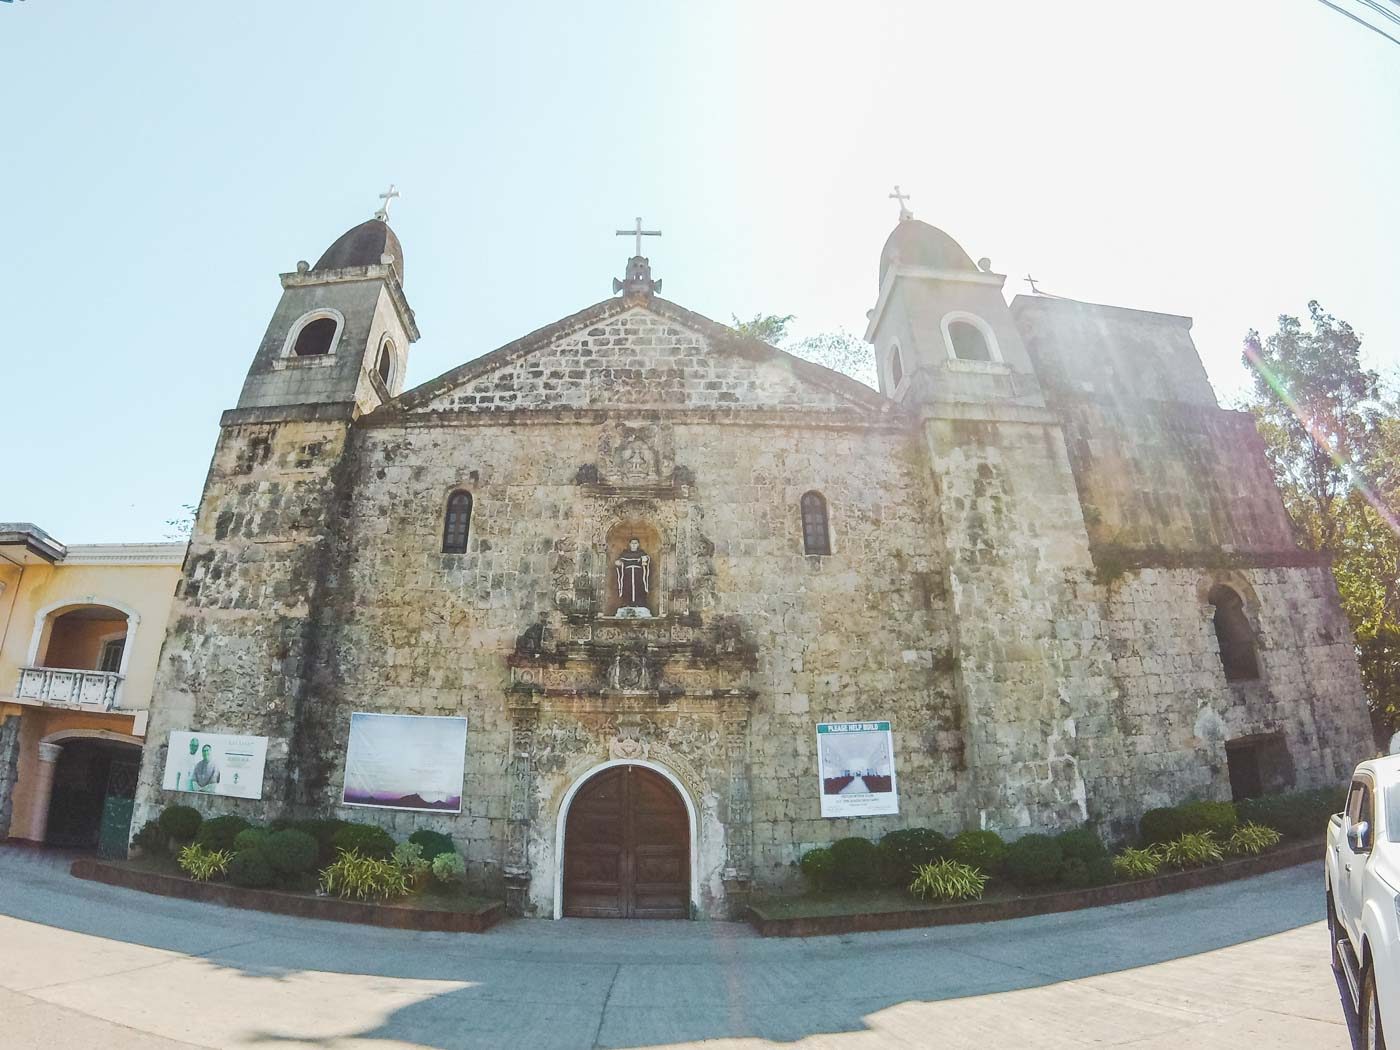 UNIQUE. The church's facade is adorned with intricate Latin-American design and interior made of colorful stone mosaic portraying the Passion of Christ which took decades to finish. Photo by Carl Don Berwin/Rappler 